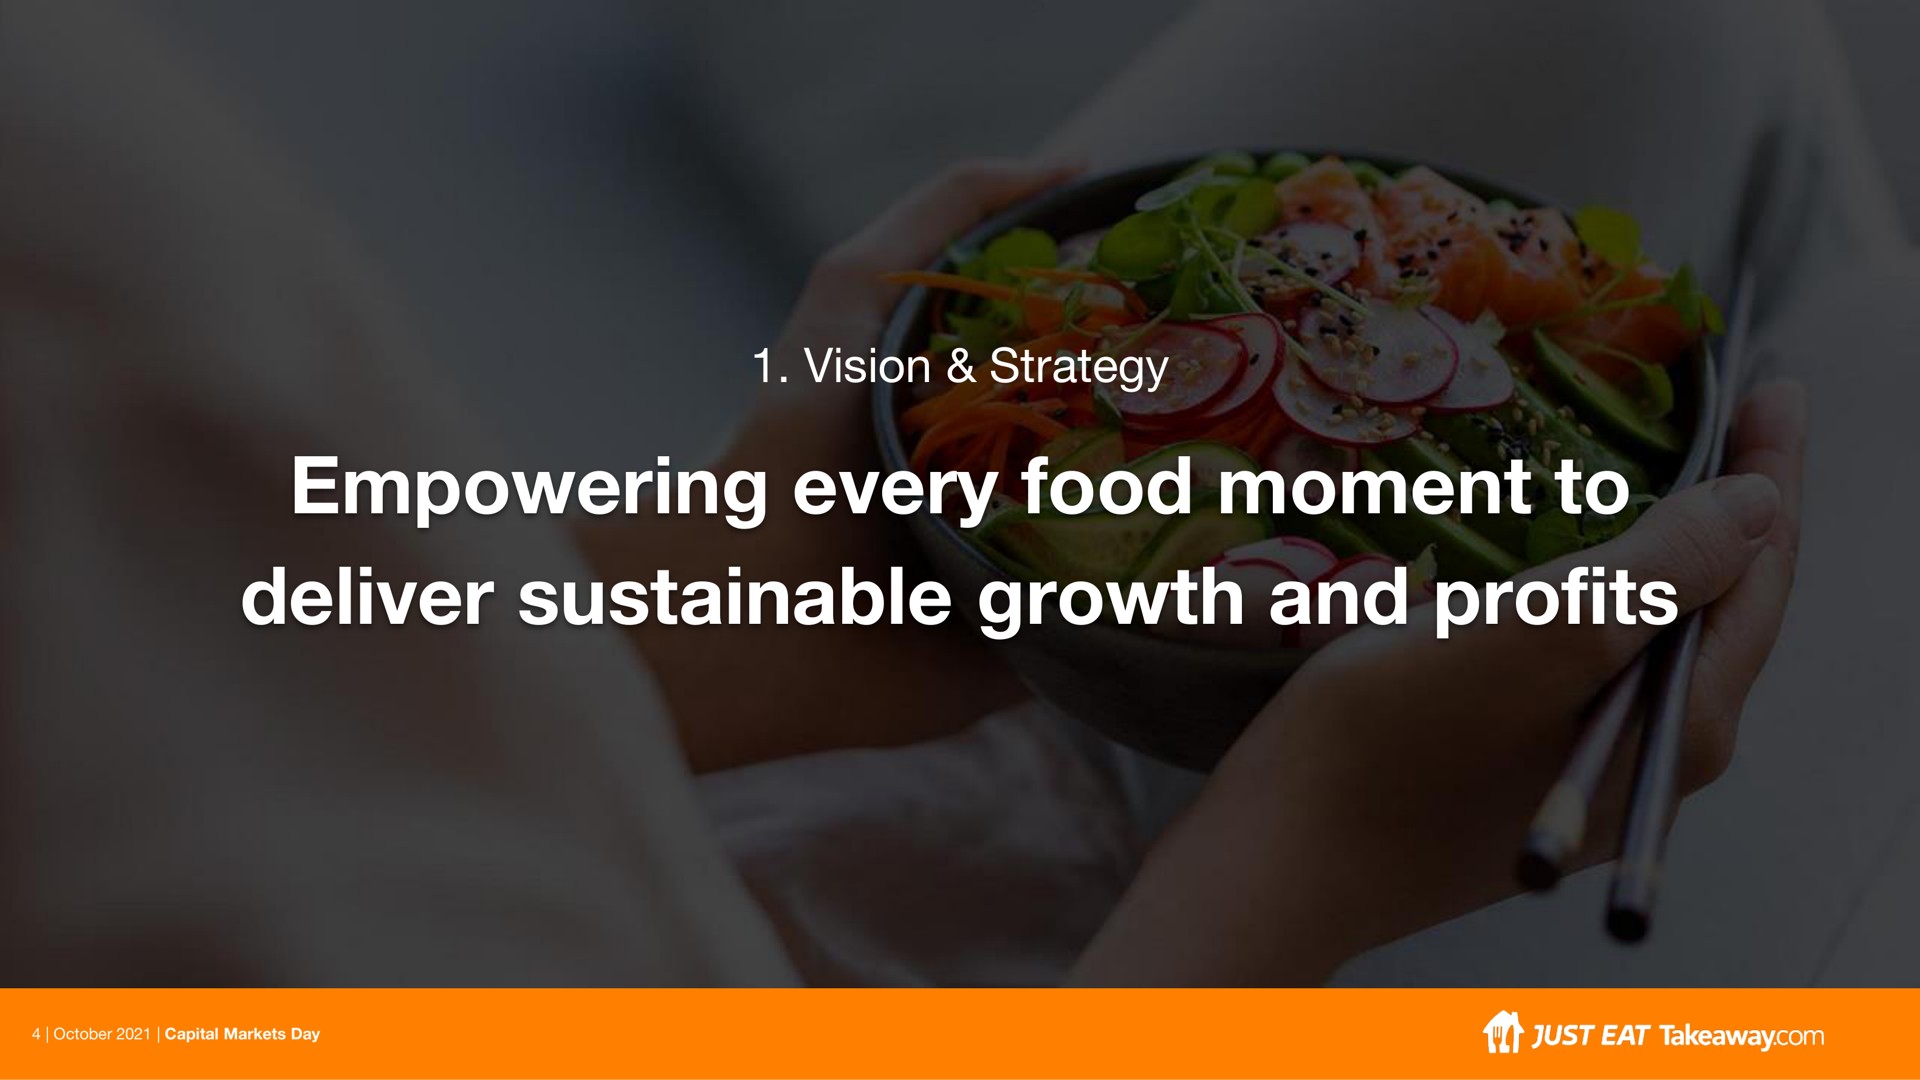 vision strategy empowering every food moment to deliver sustainable growth and profits | Just Eat Takeaway.com